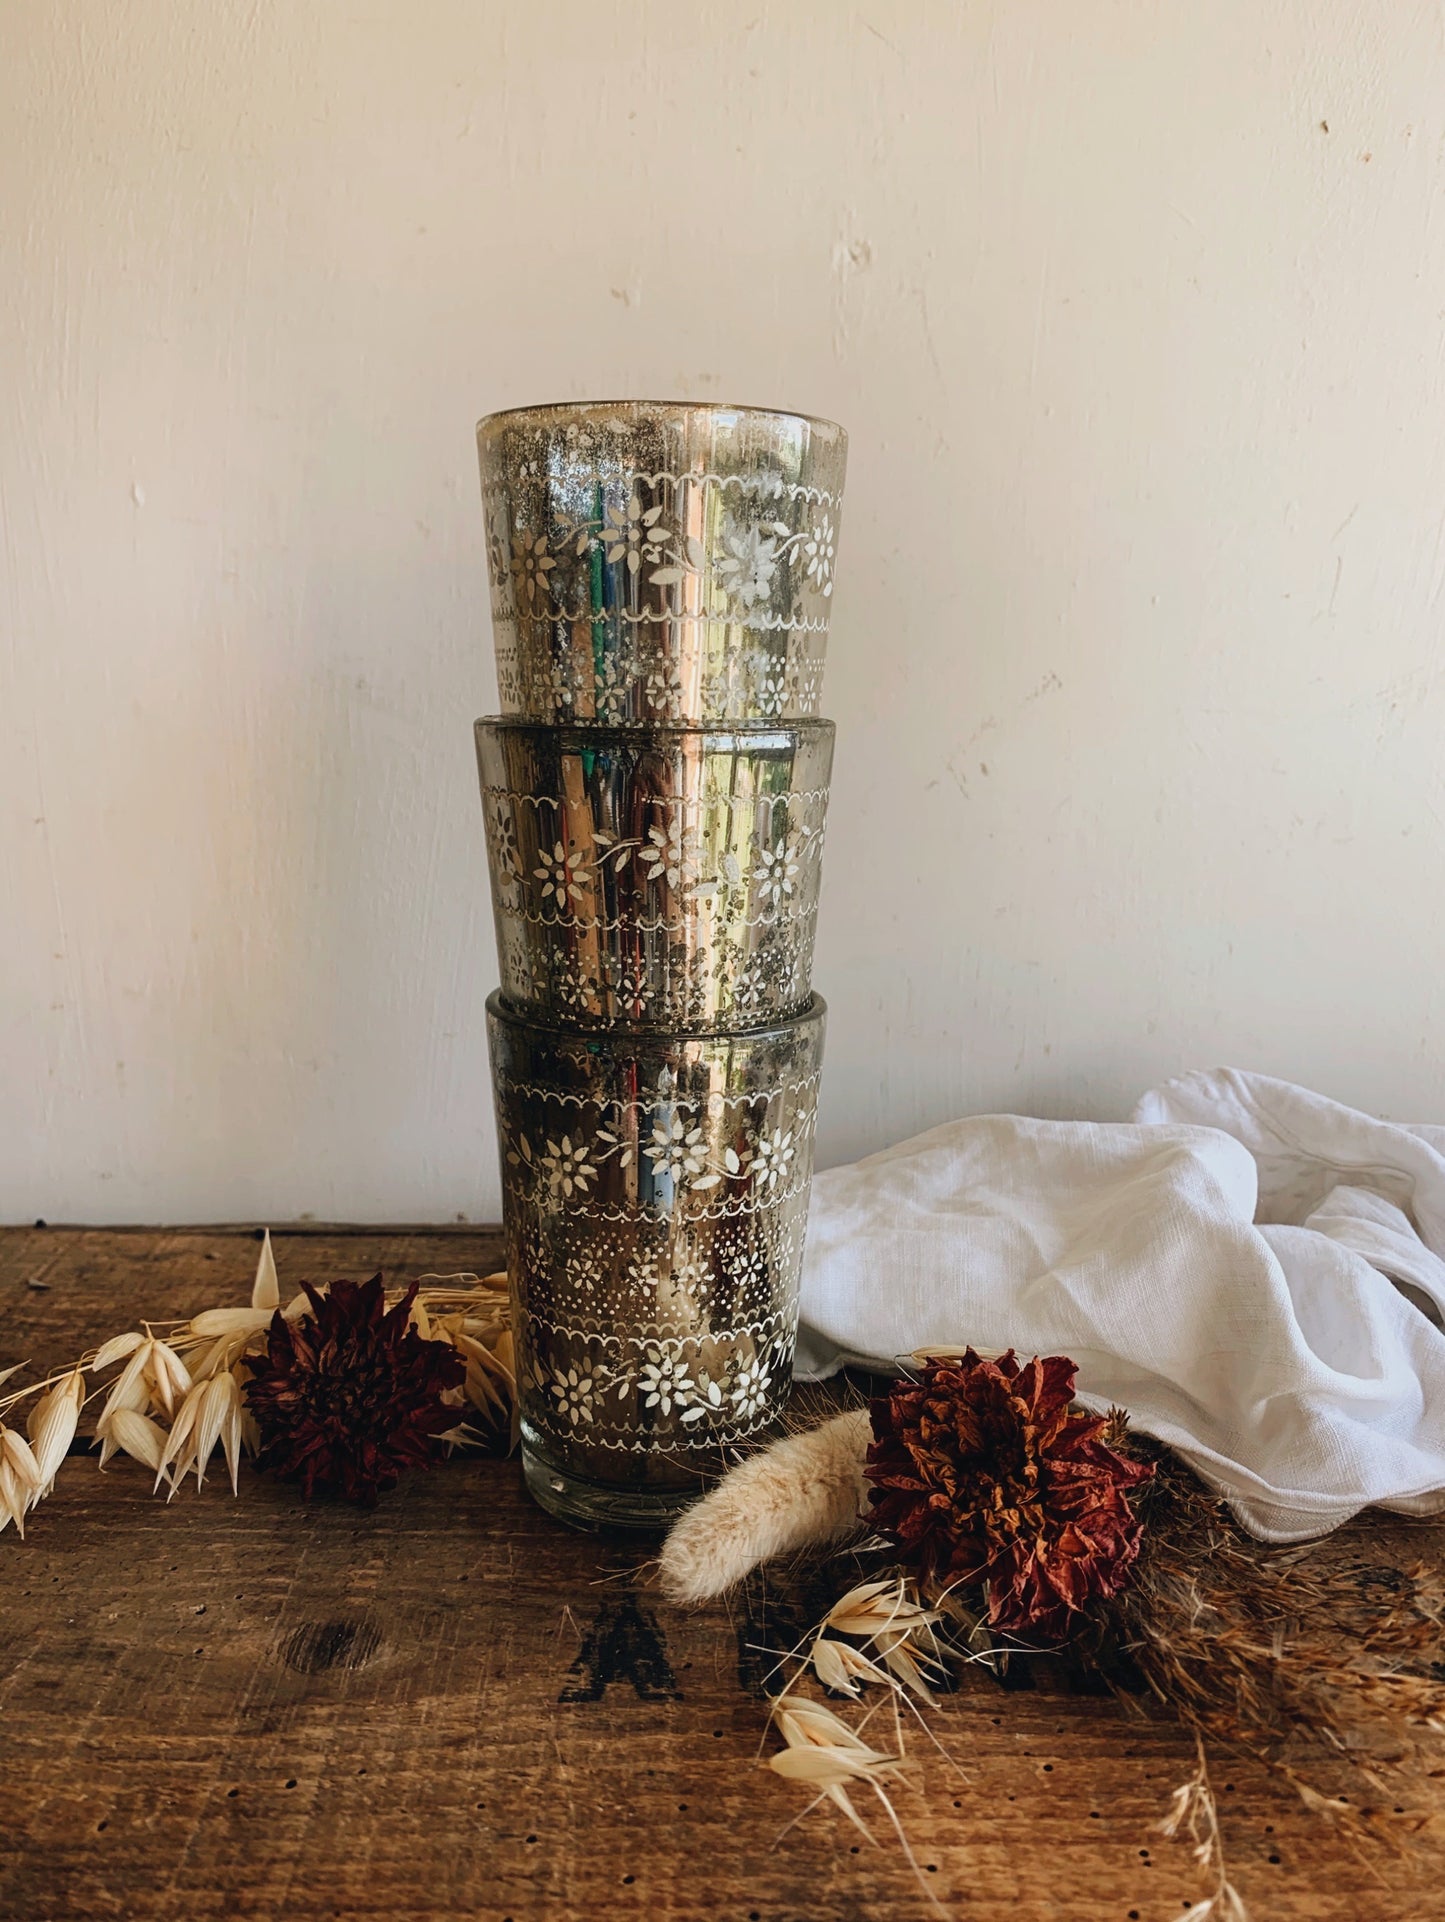 Rustic Decorative Glass Tumbler (sold separately)